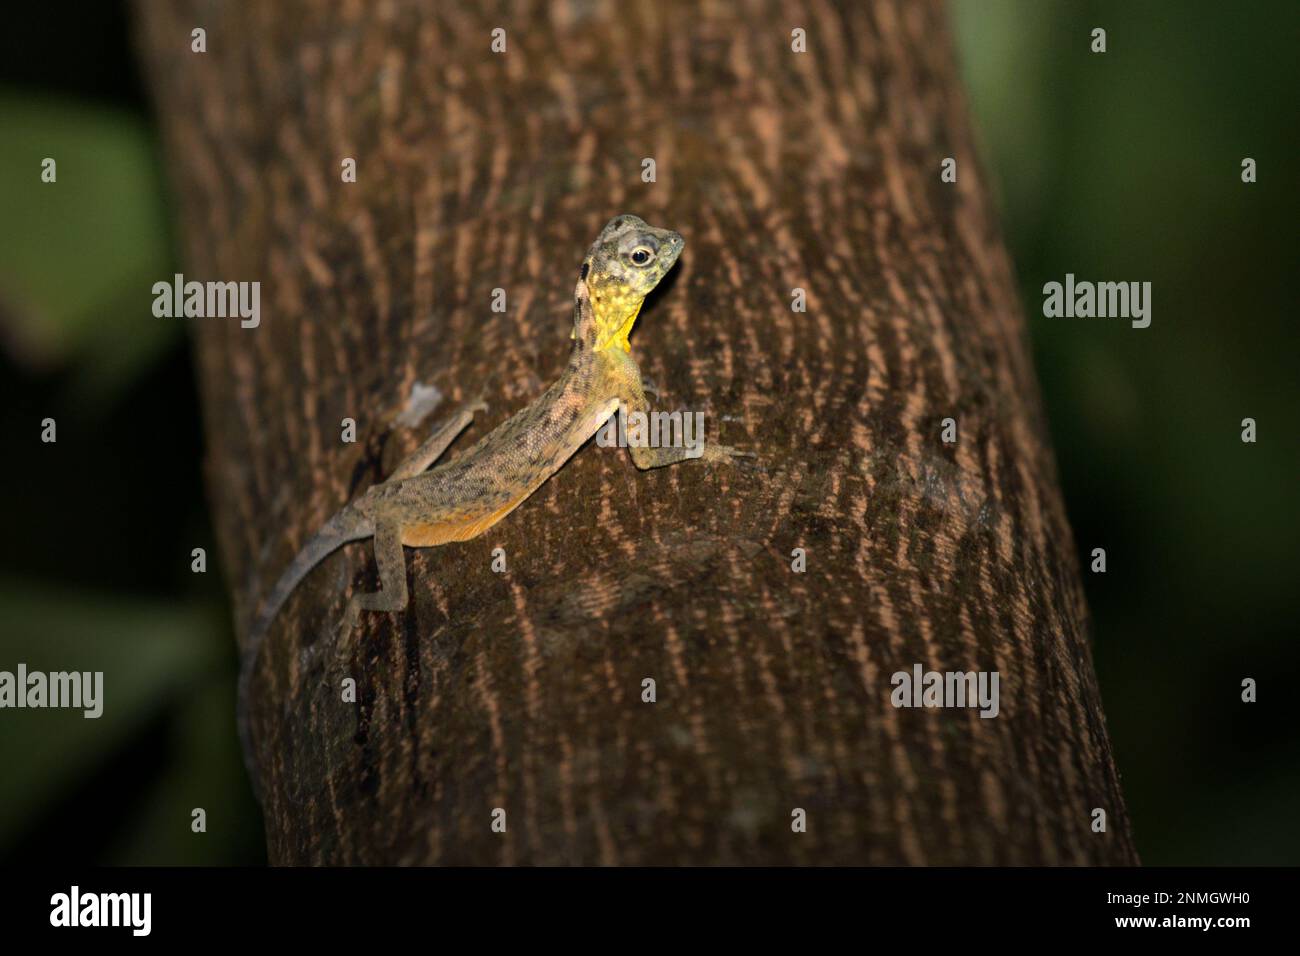 A Sulawesi lined gliding lizard (Draco spilonotus) moving on a tree in Tangkoko Nature Reserves, North Sulawesi, Indonesia. Latest research suggests that reptile richness is likely to decrease significantly across most parts of the world with ongoing future climate change. 'This effect, in addition to considerable impacts on species range extent, overlap and position, was visible across lizards, snakes and turtles alike,' wrote a team of scientists led by Matthias Biber (Department for Life Science Systems, School of Life Sciences, Technical University of Munich, Freising). Stock Photo